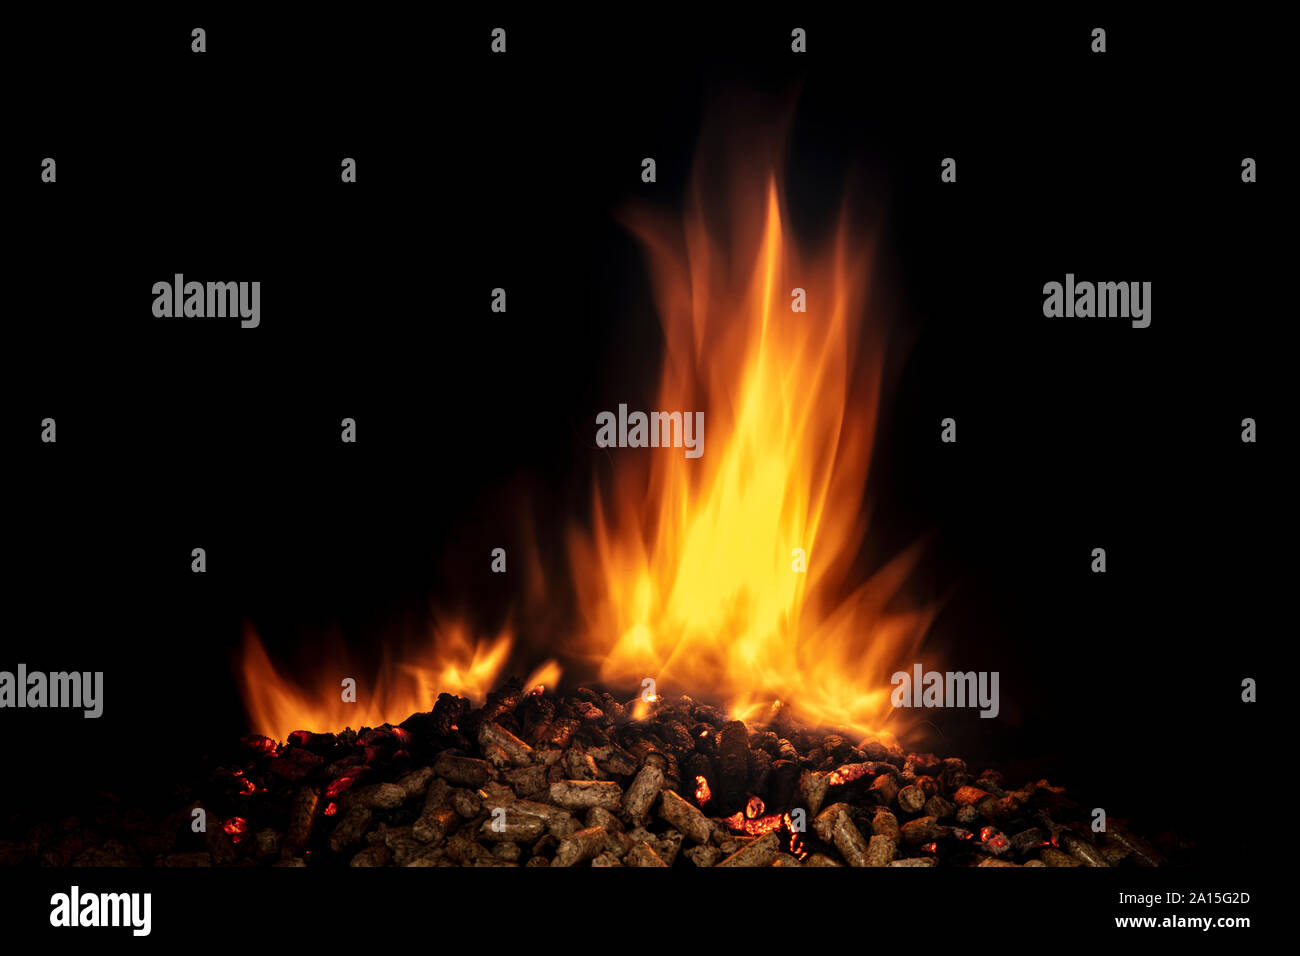 detail of the flame lit on wood pellets on a black background Stock Photo